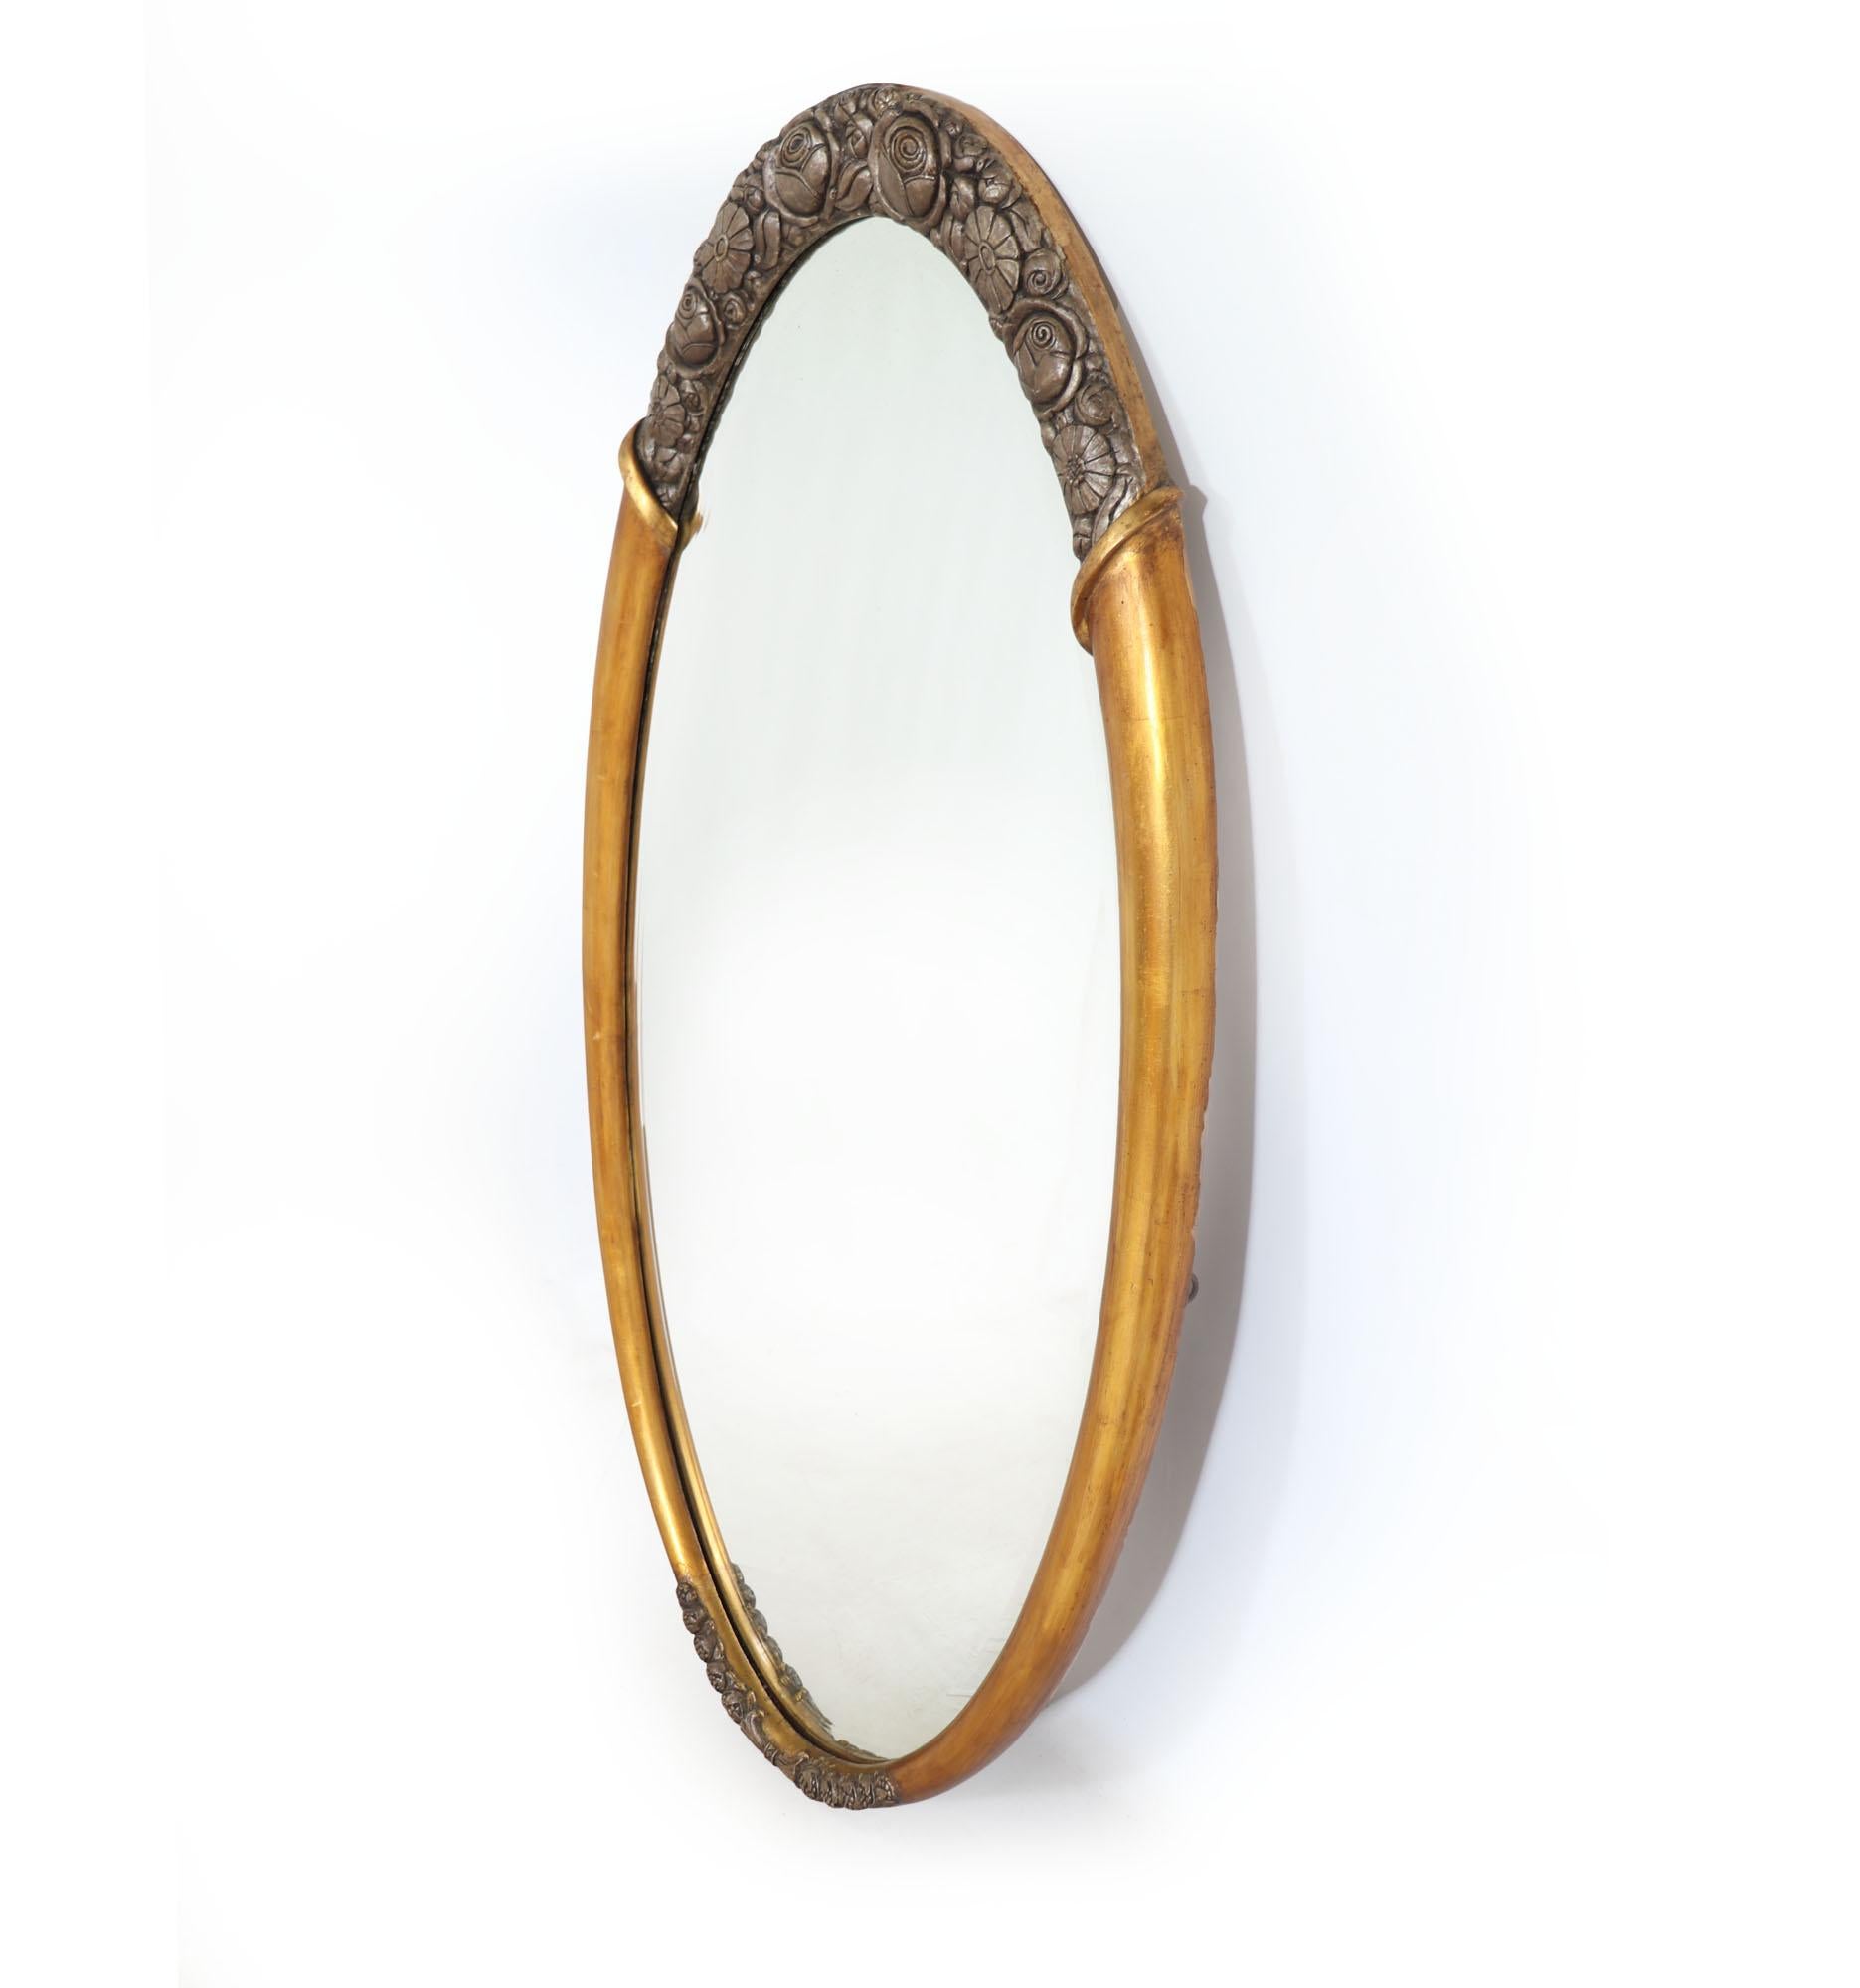 French Art Deco Parcel Gilt Oval Mirror By Sue et Mare 1925 For Sale